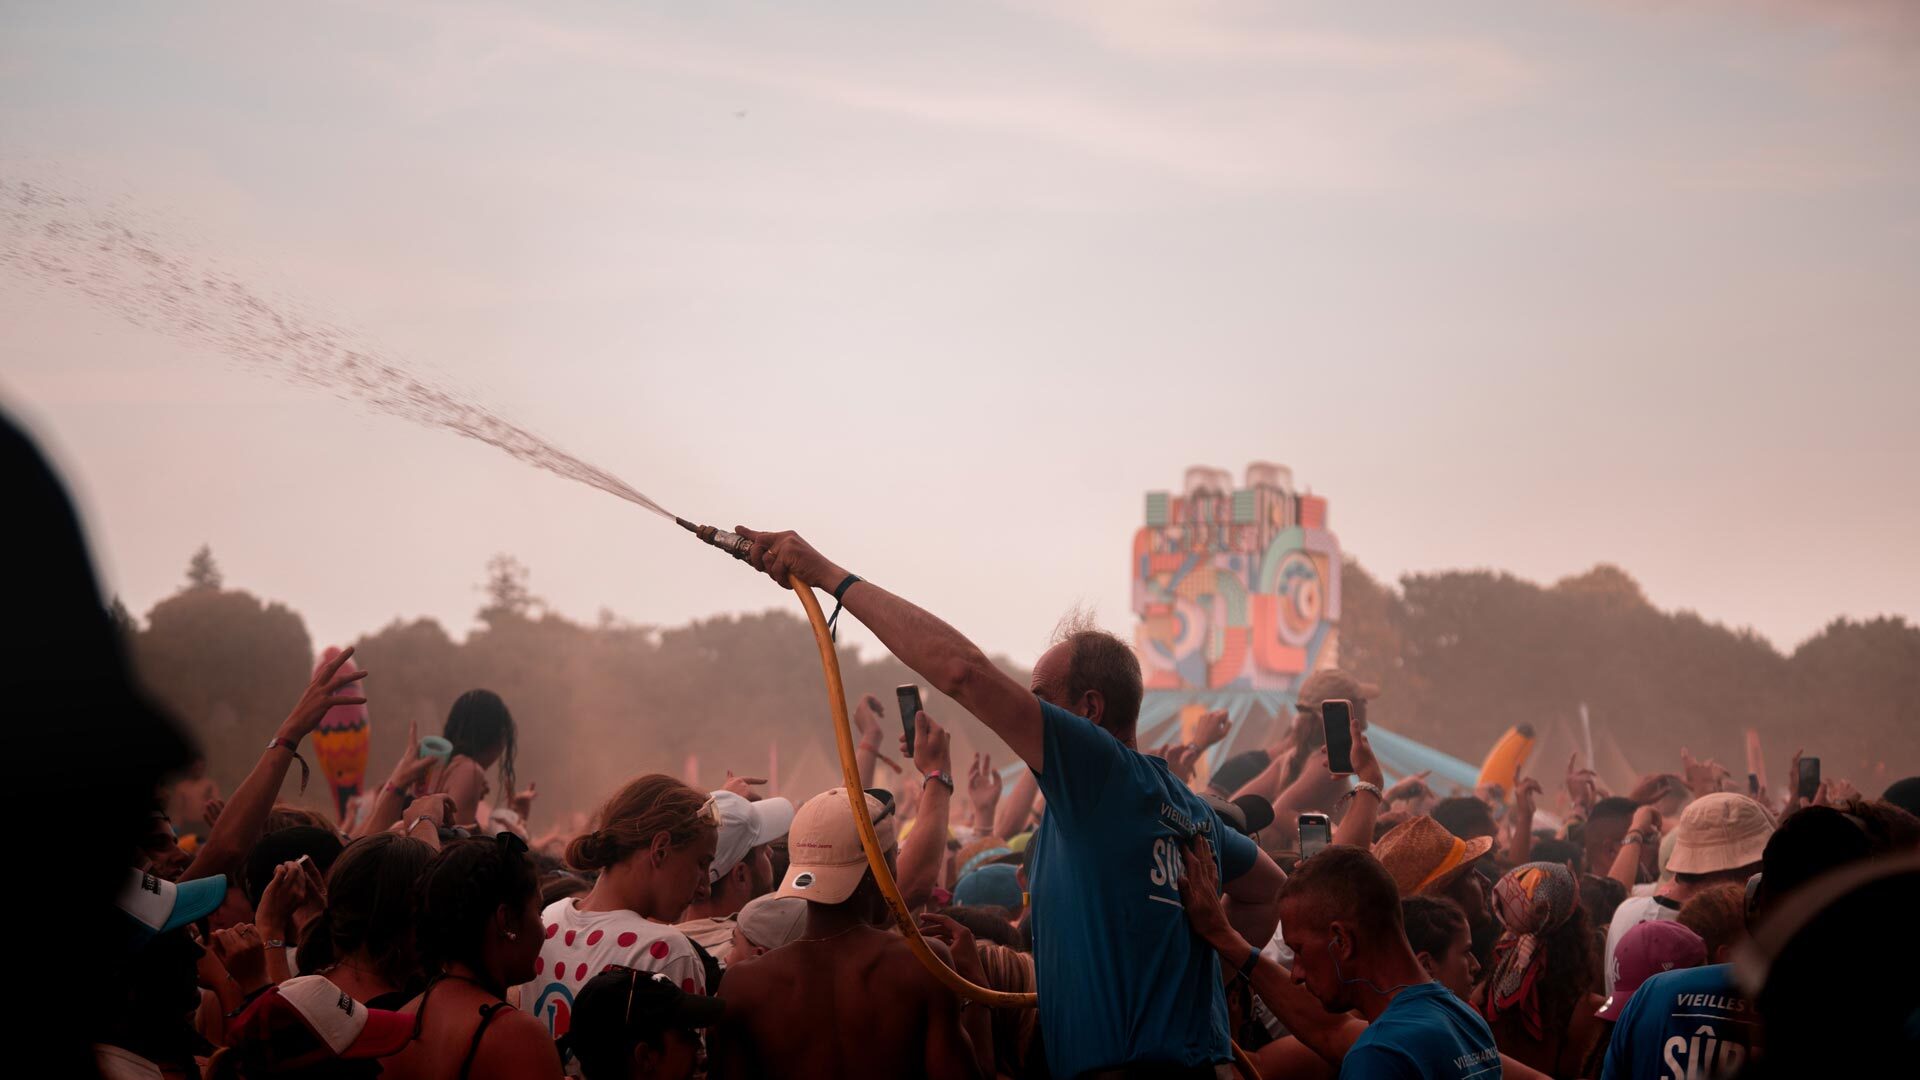 A photo of people spraying each other with water at a festival. By Mat Napo.